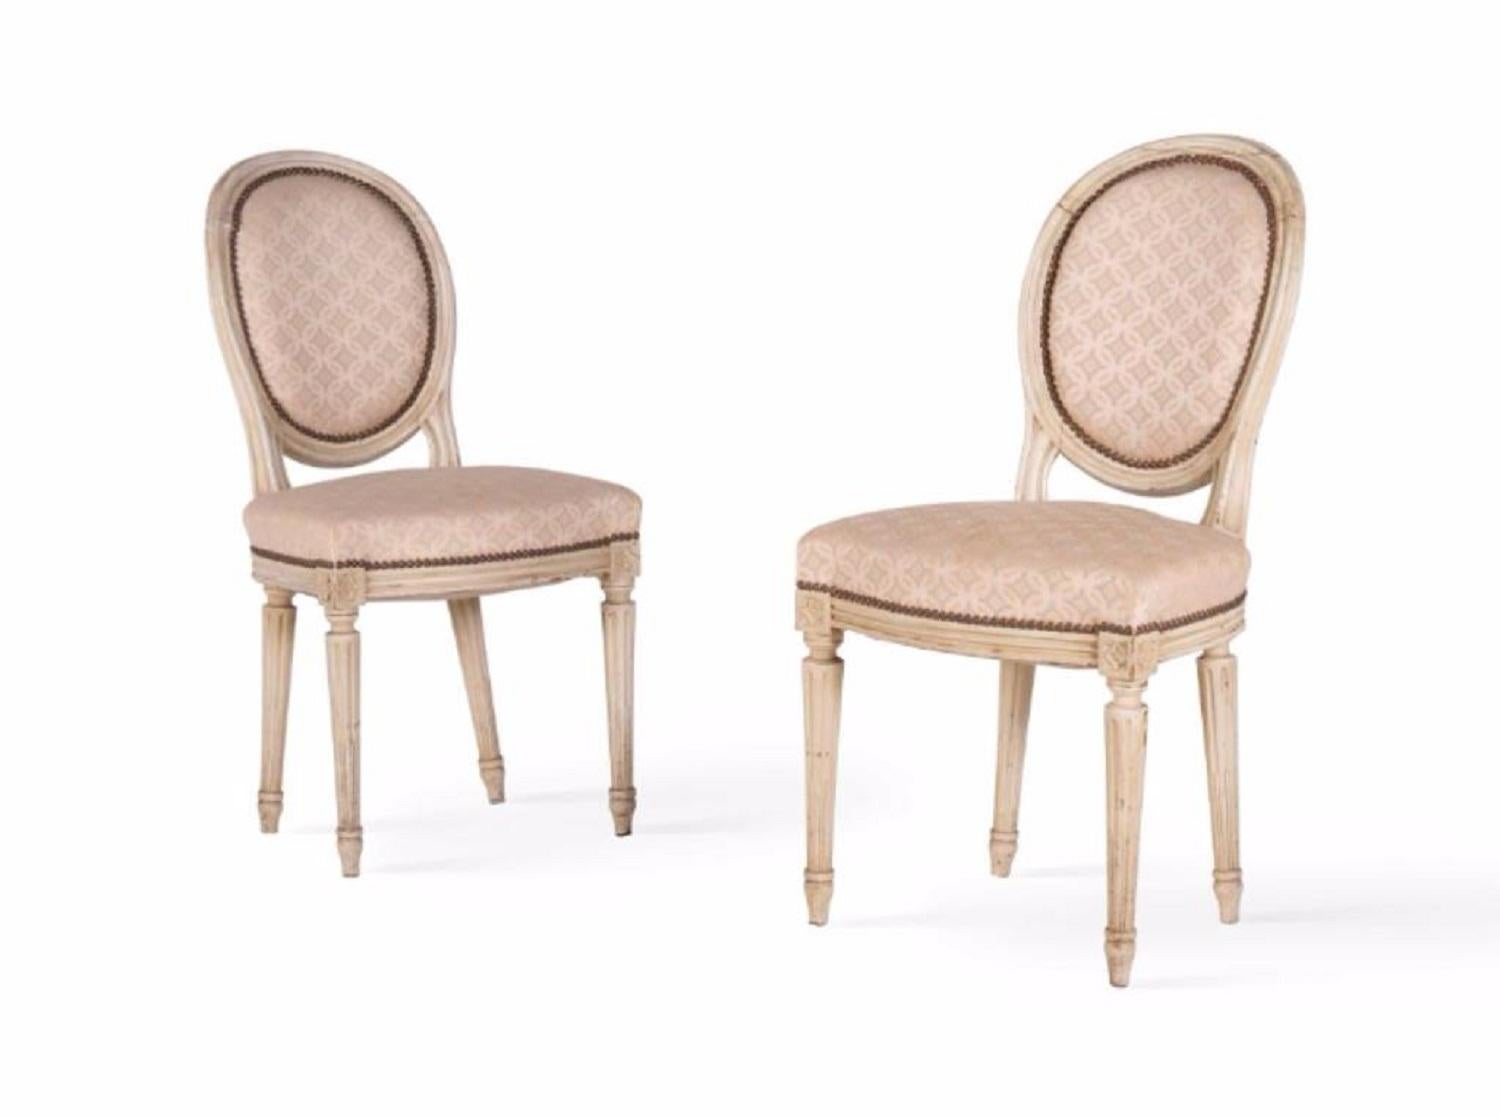 Two elegant antique chairs from France in Louis XVI style, circa 1860. These chairs are made of solid painted wood with curved frame and legs and have been reupholstered with a beige figured fabric. 'Rudente´' detail over the 'canelures' of the